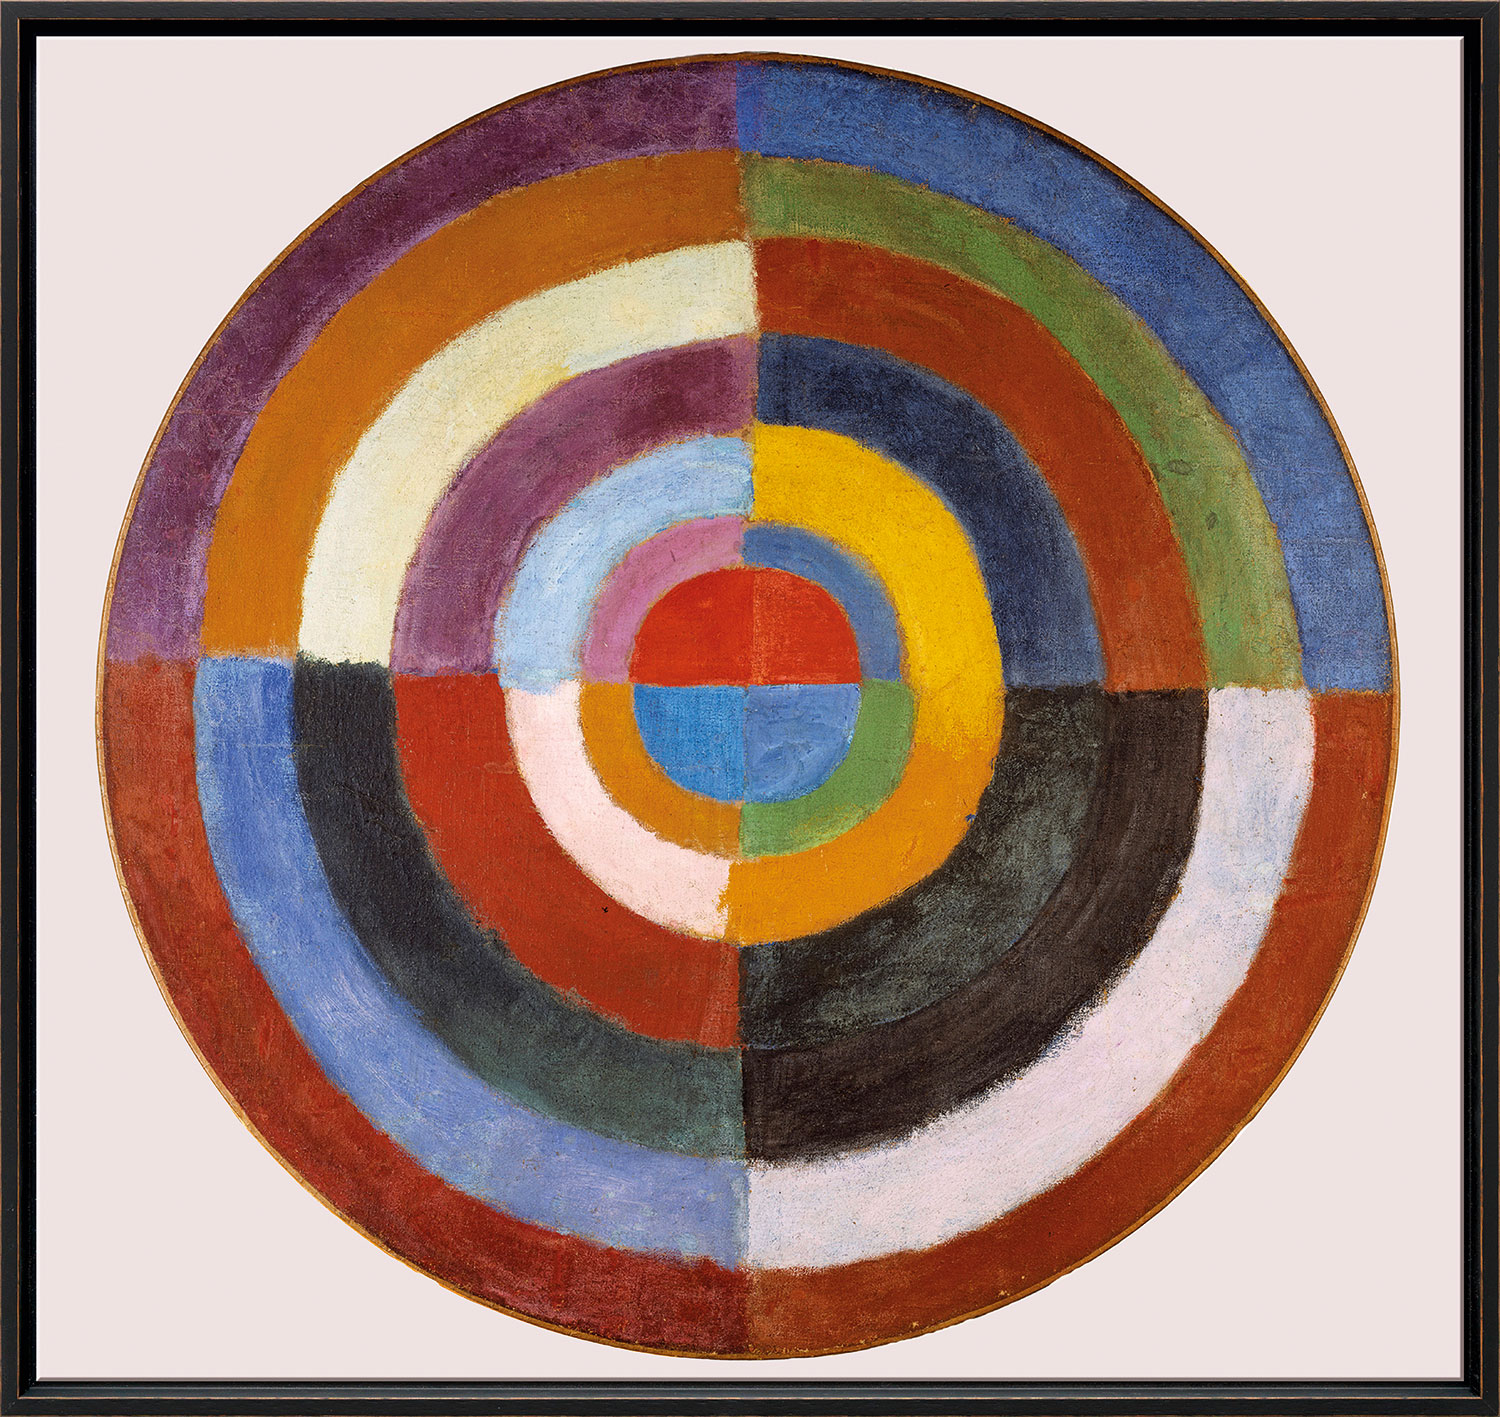 Picture "Disque (Le premier disque)" (1913), framed by Robert Delaunay